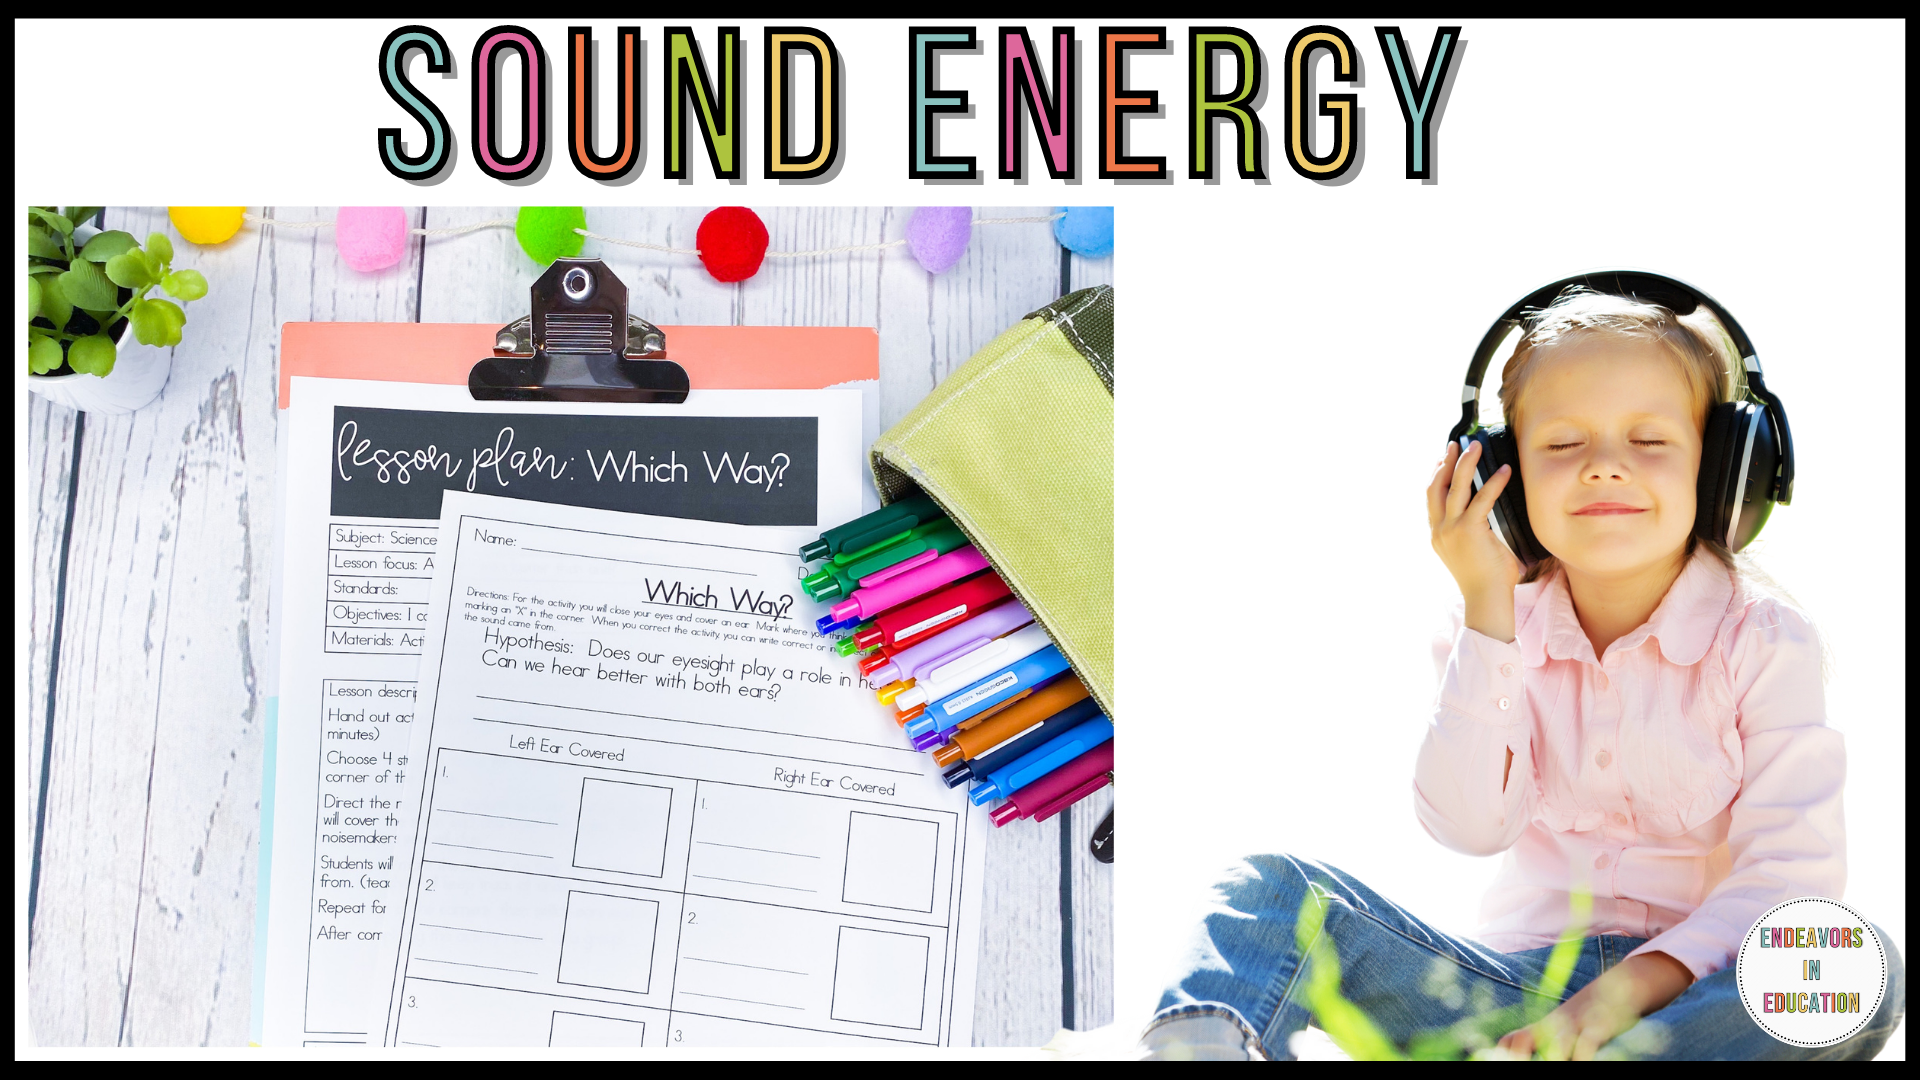 Teaching sound energy blog header Image shows girl sitting with headphones on and next to it a picture of a science activity layered on a clipboard